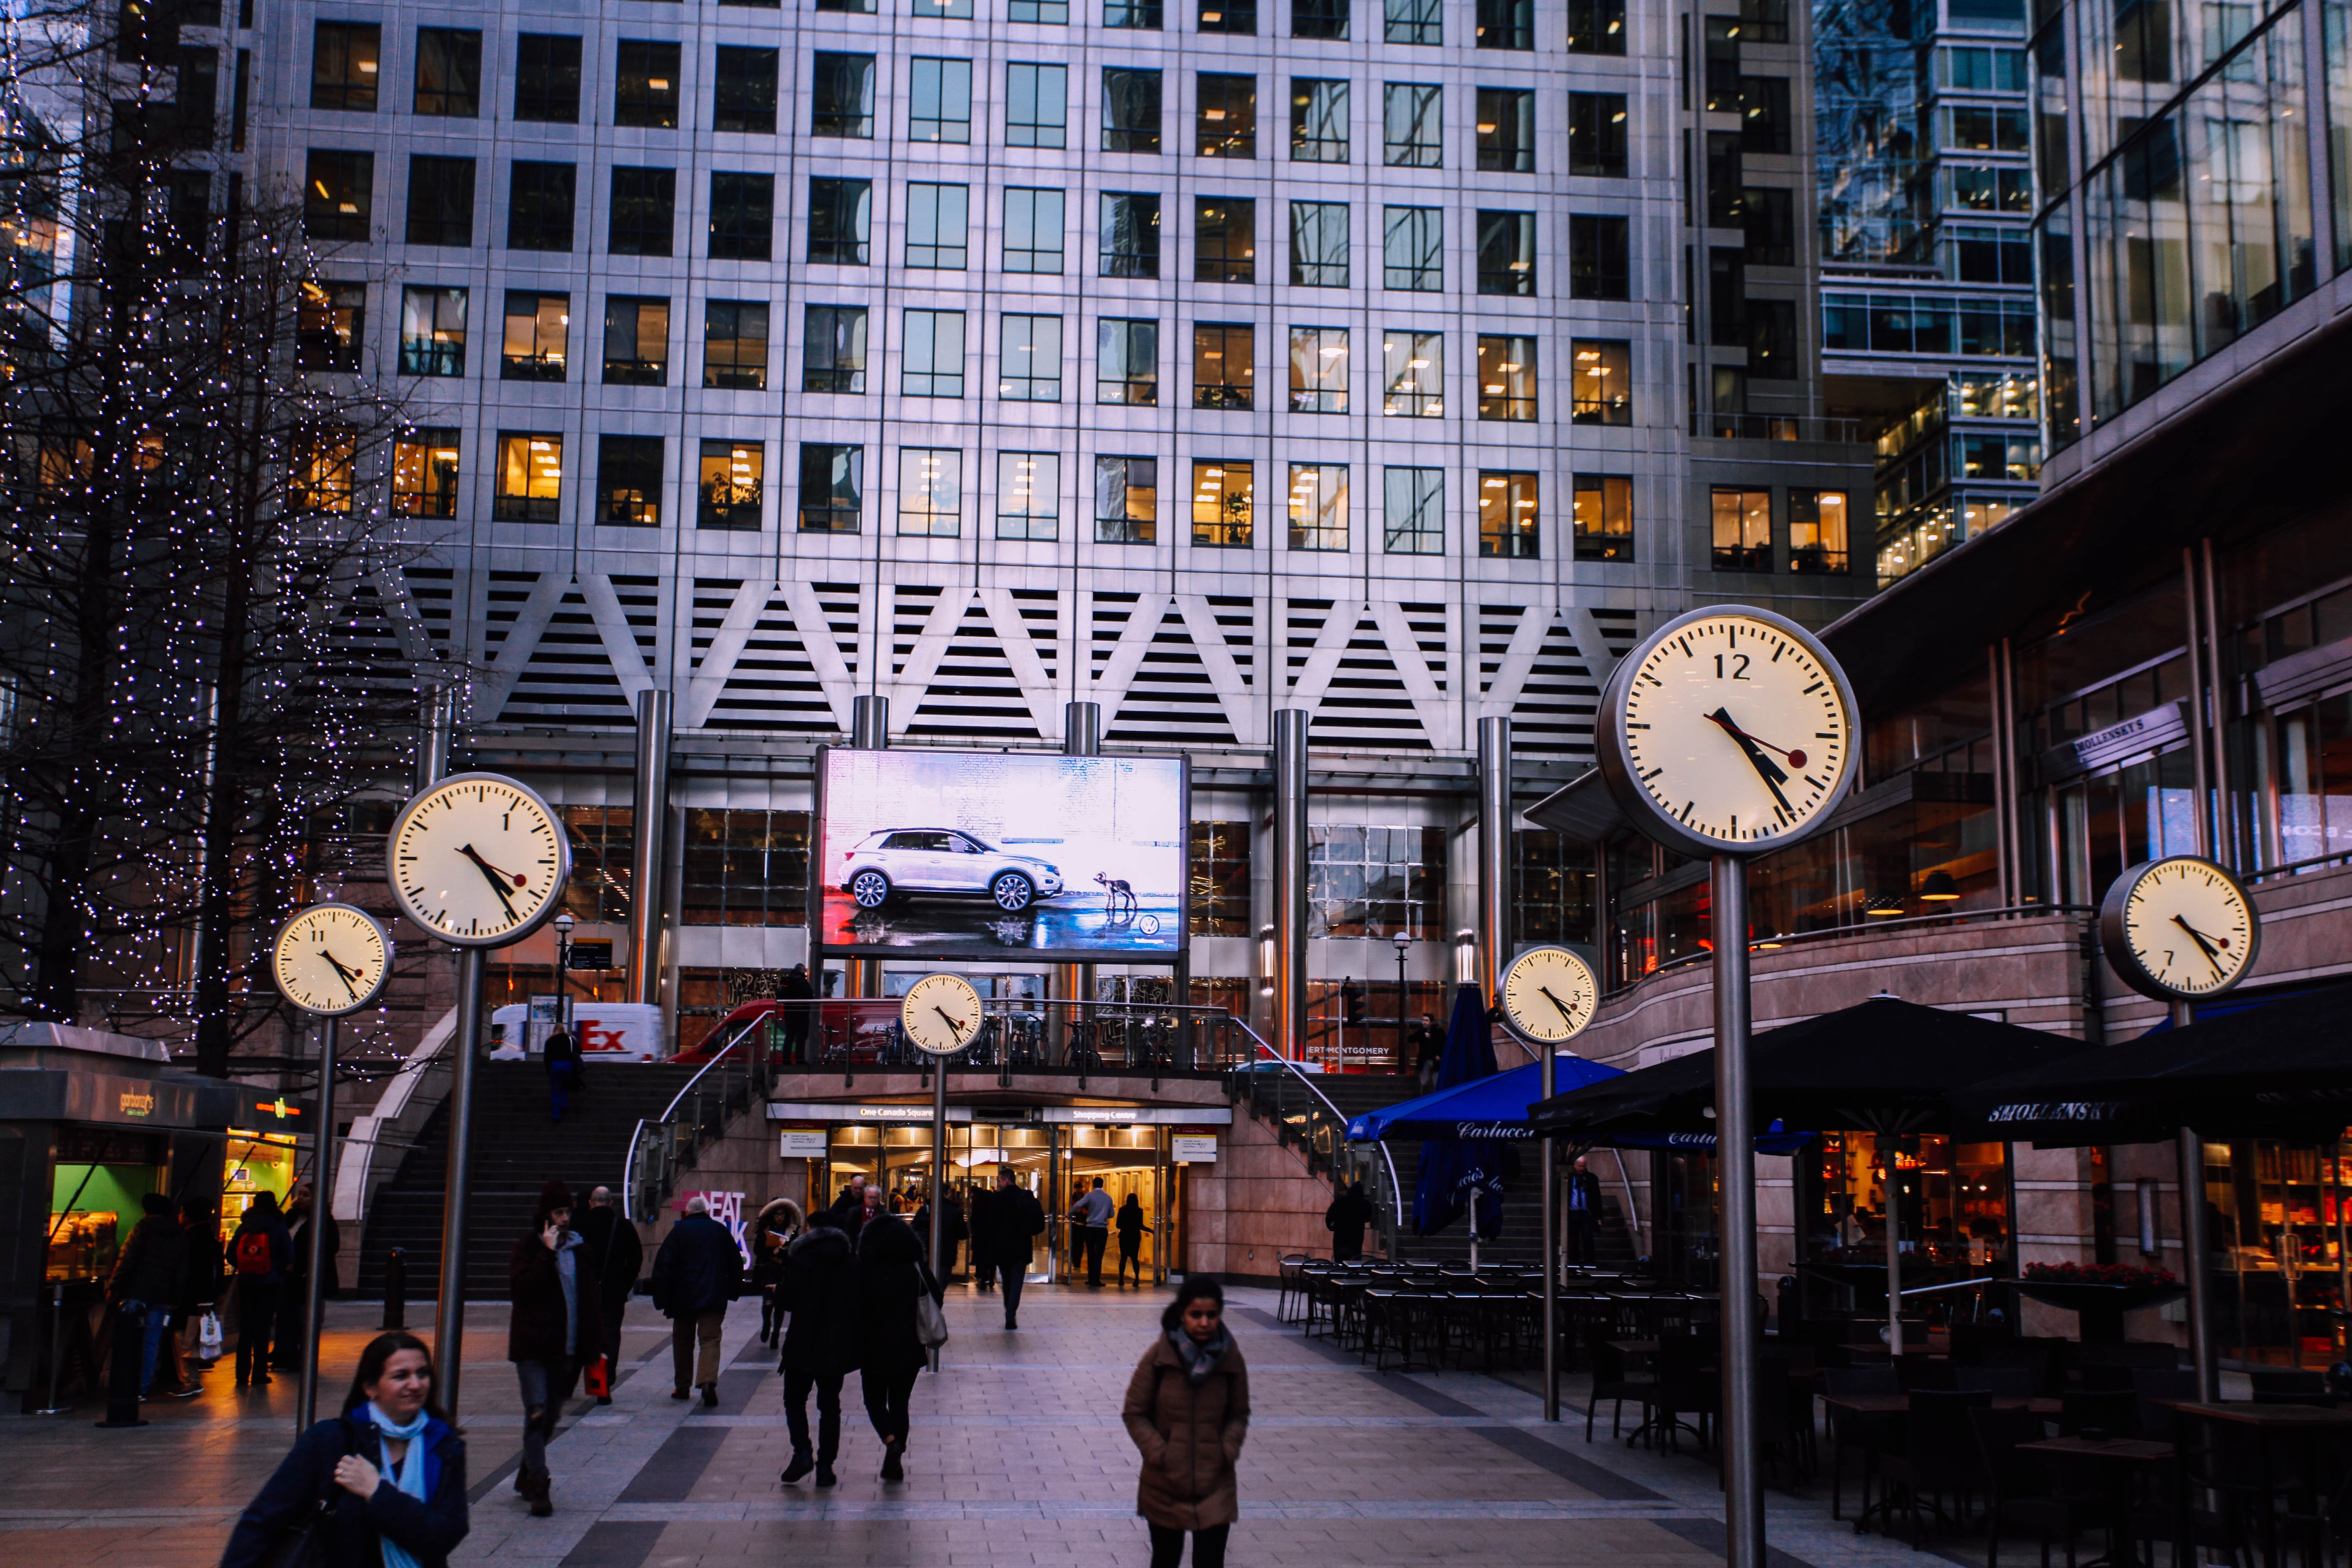 A view of Canary Wharf showing people, buildings and large illuminated clockfaces